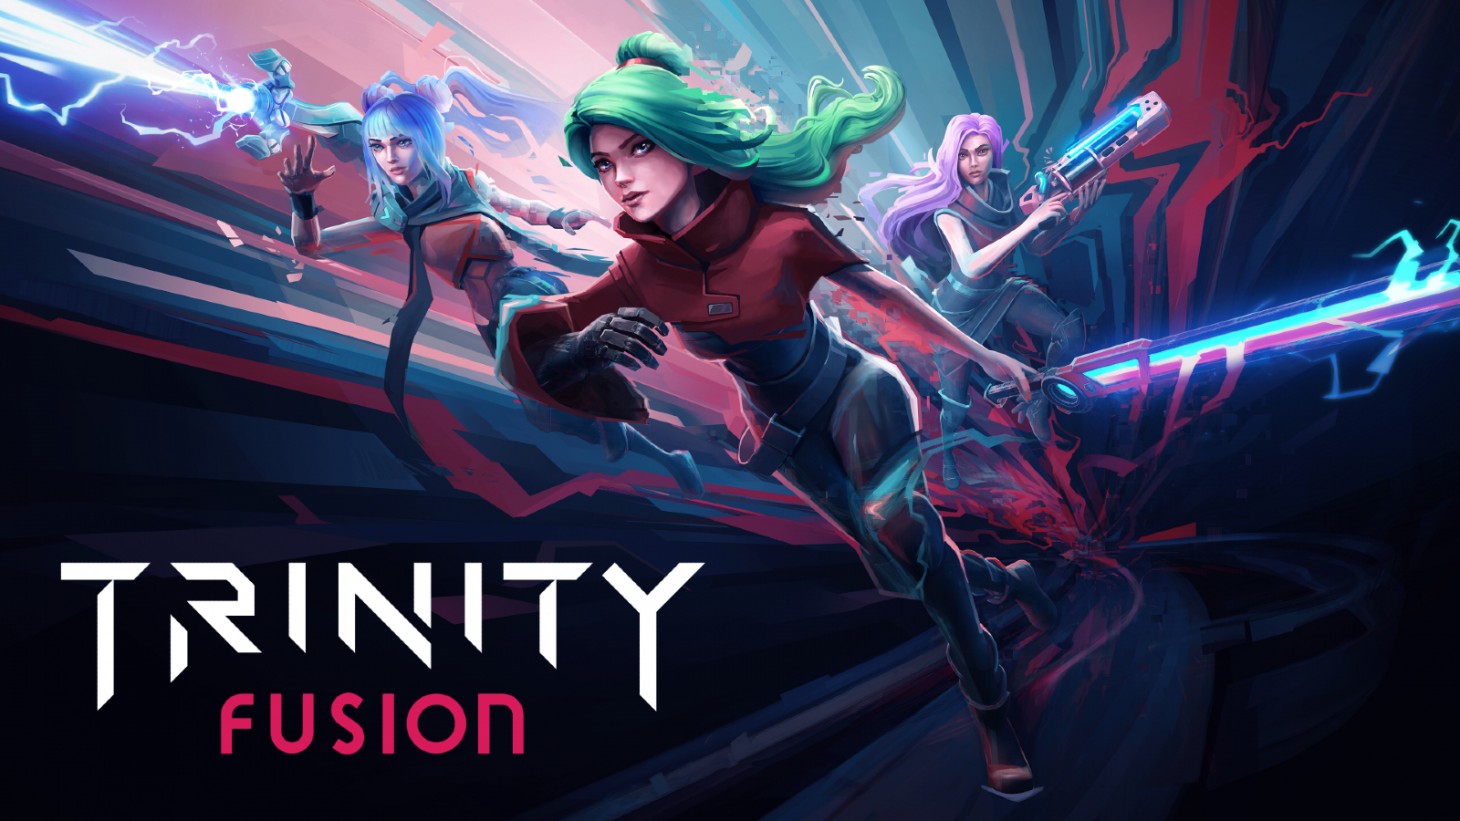 trinity fusion action roguelite platformer early access launch release date gameplay trailer